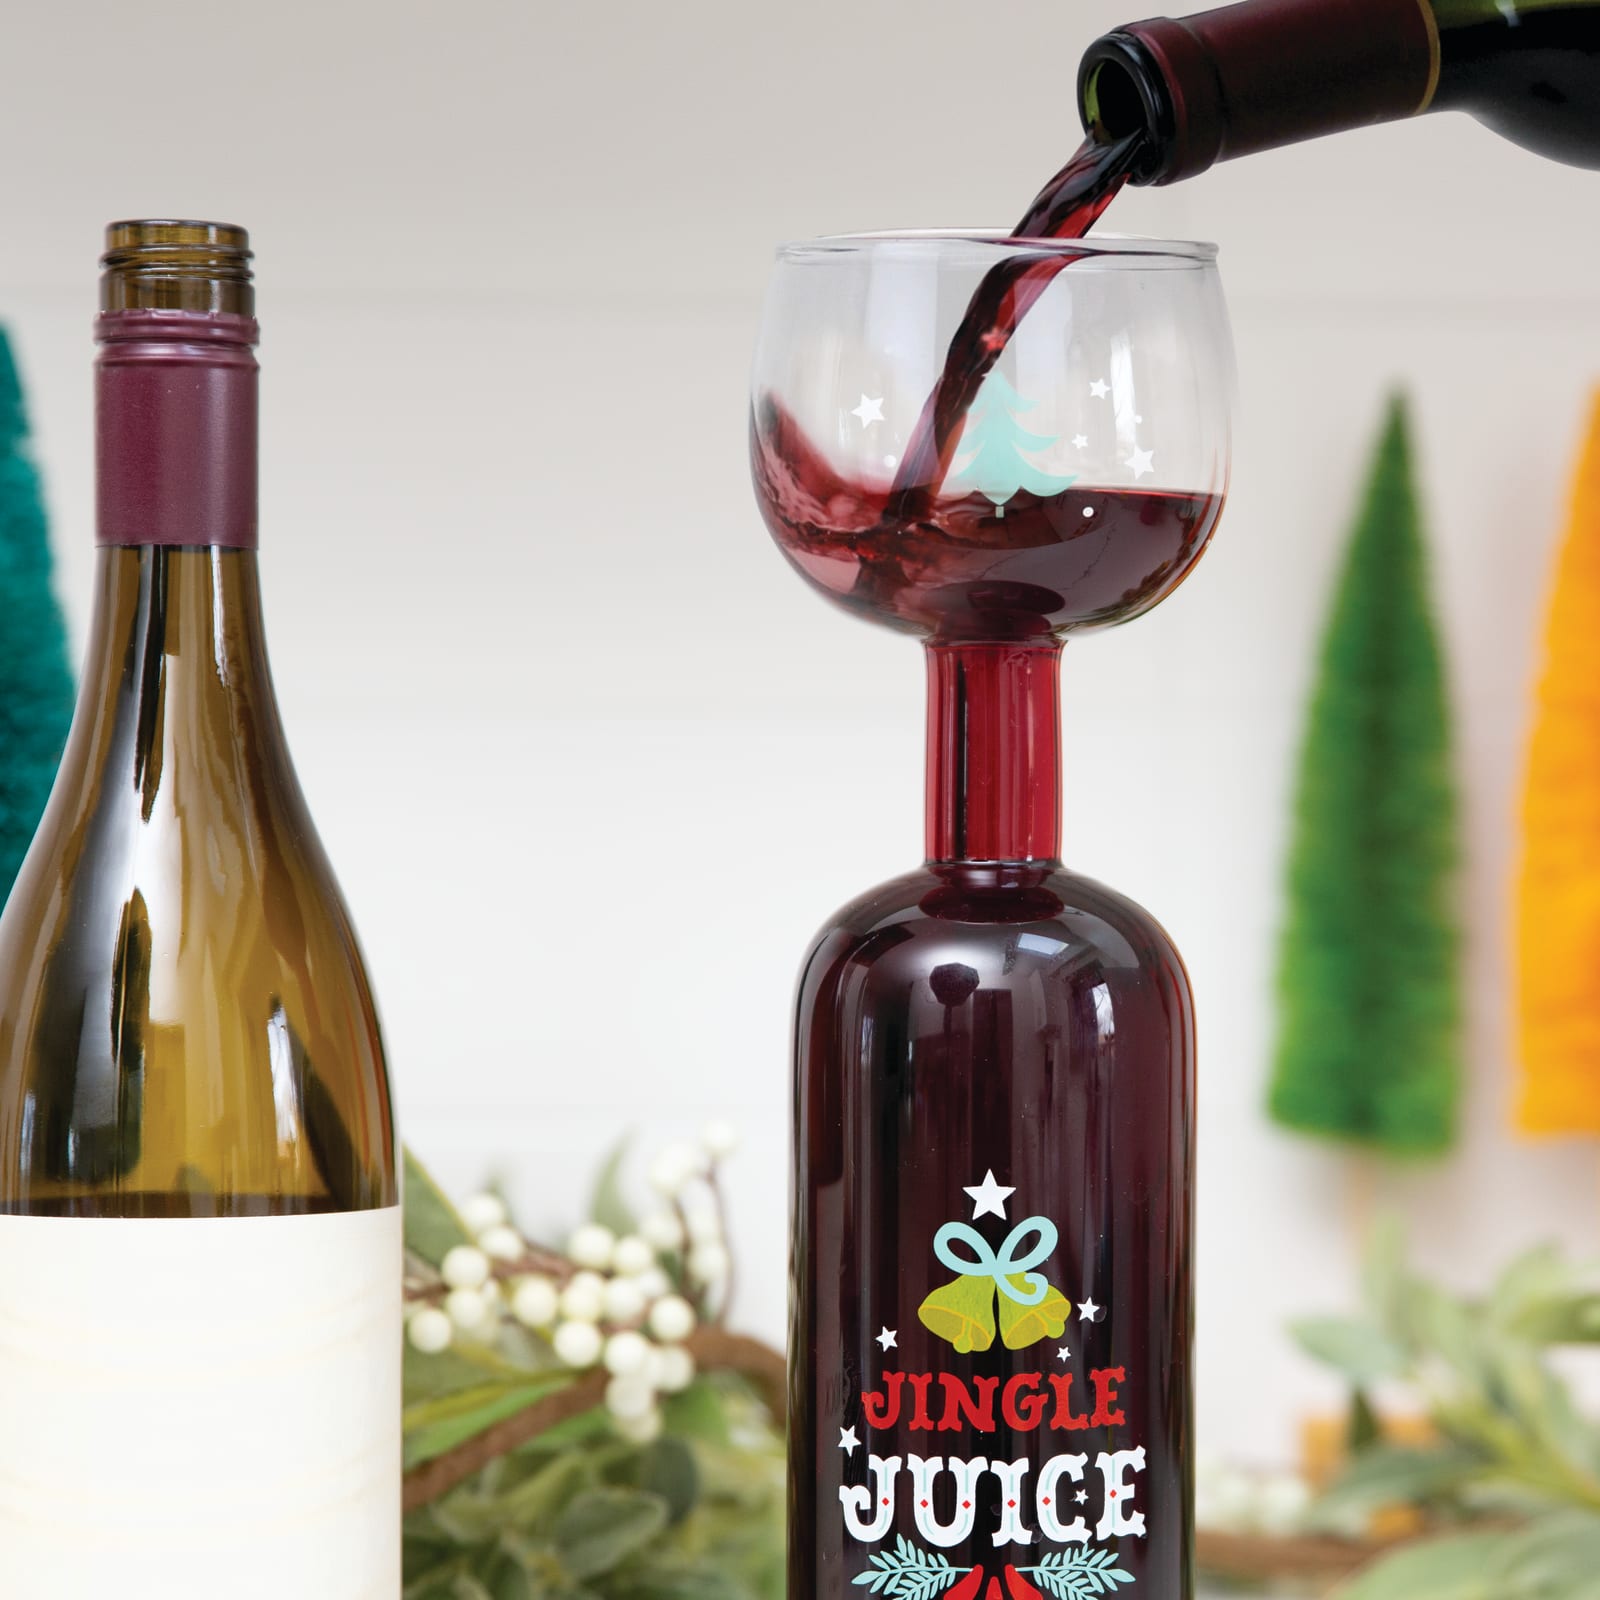 Big Mouth Inc. The Wine Bottle Glass - Glass Wine